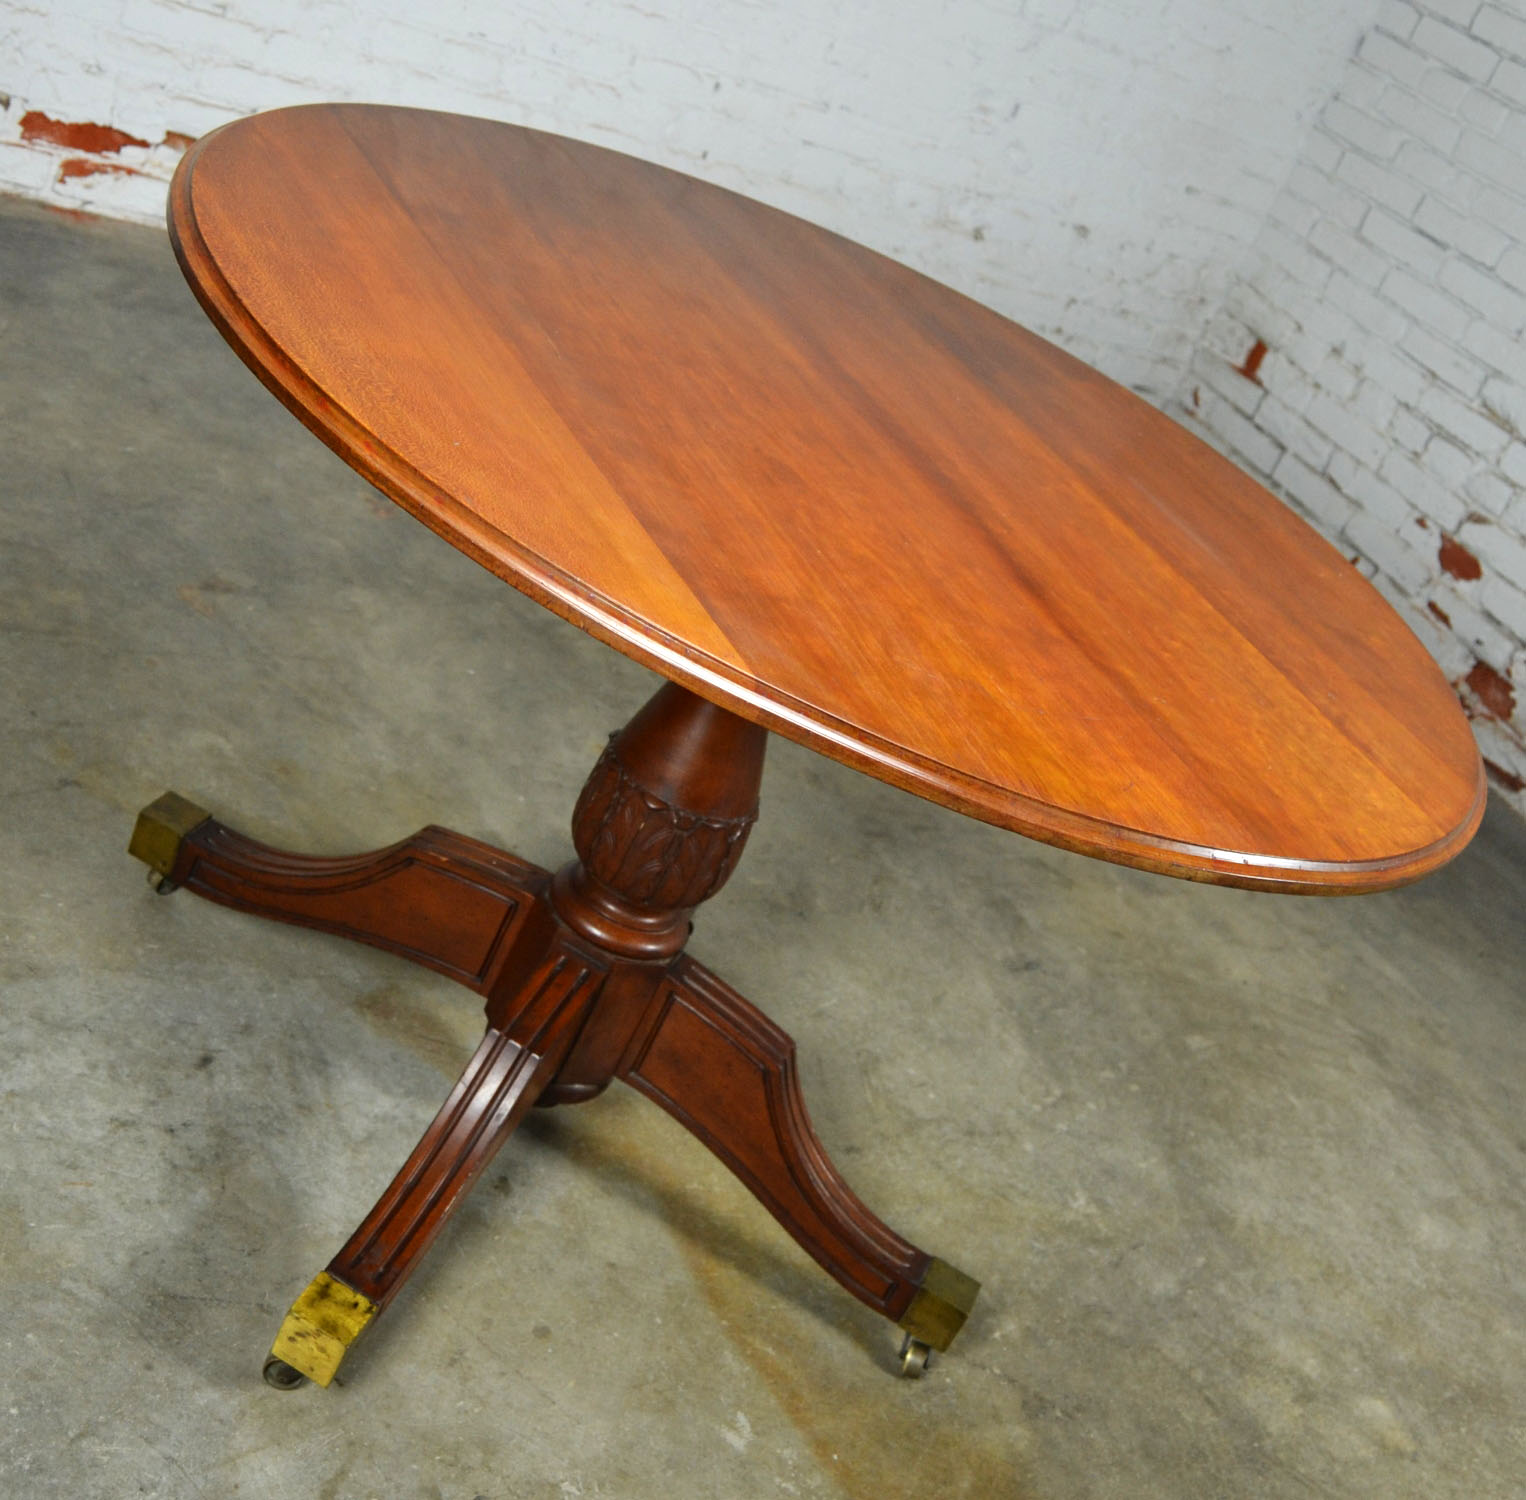 Classical Regency Carved Mahogany Round Tilt-Top Breakfast or Center Table